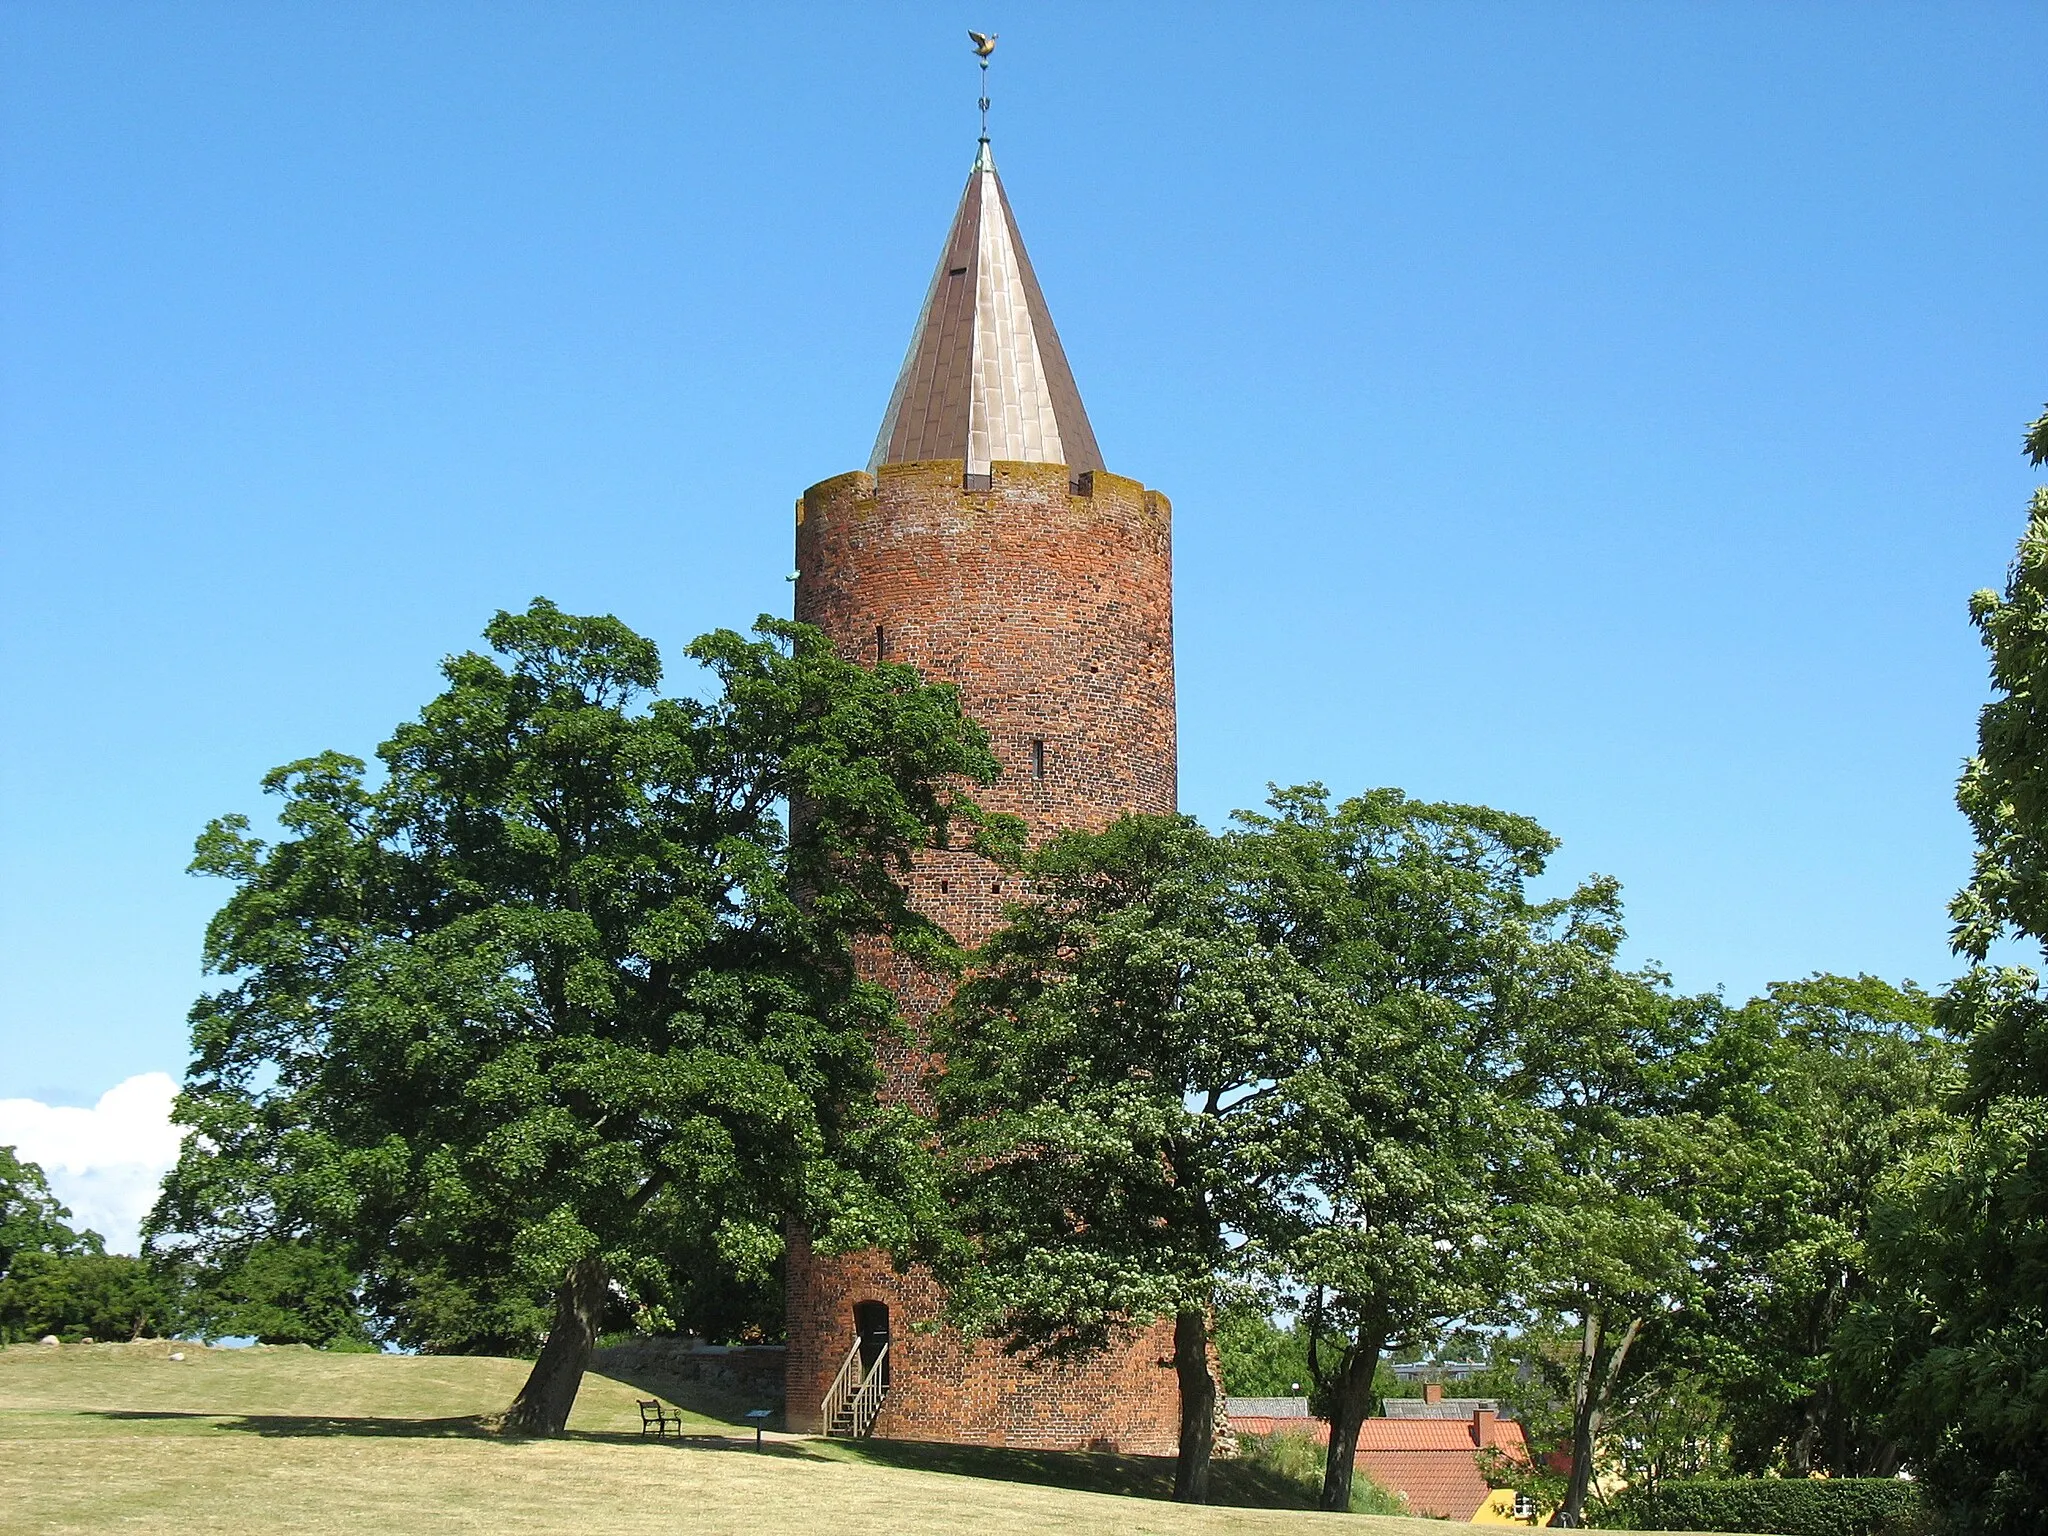 Photo showing: The old fortress tower "Gåsetårnet" in the town "Vordingborg", located i South Zeland, east Denmark.